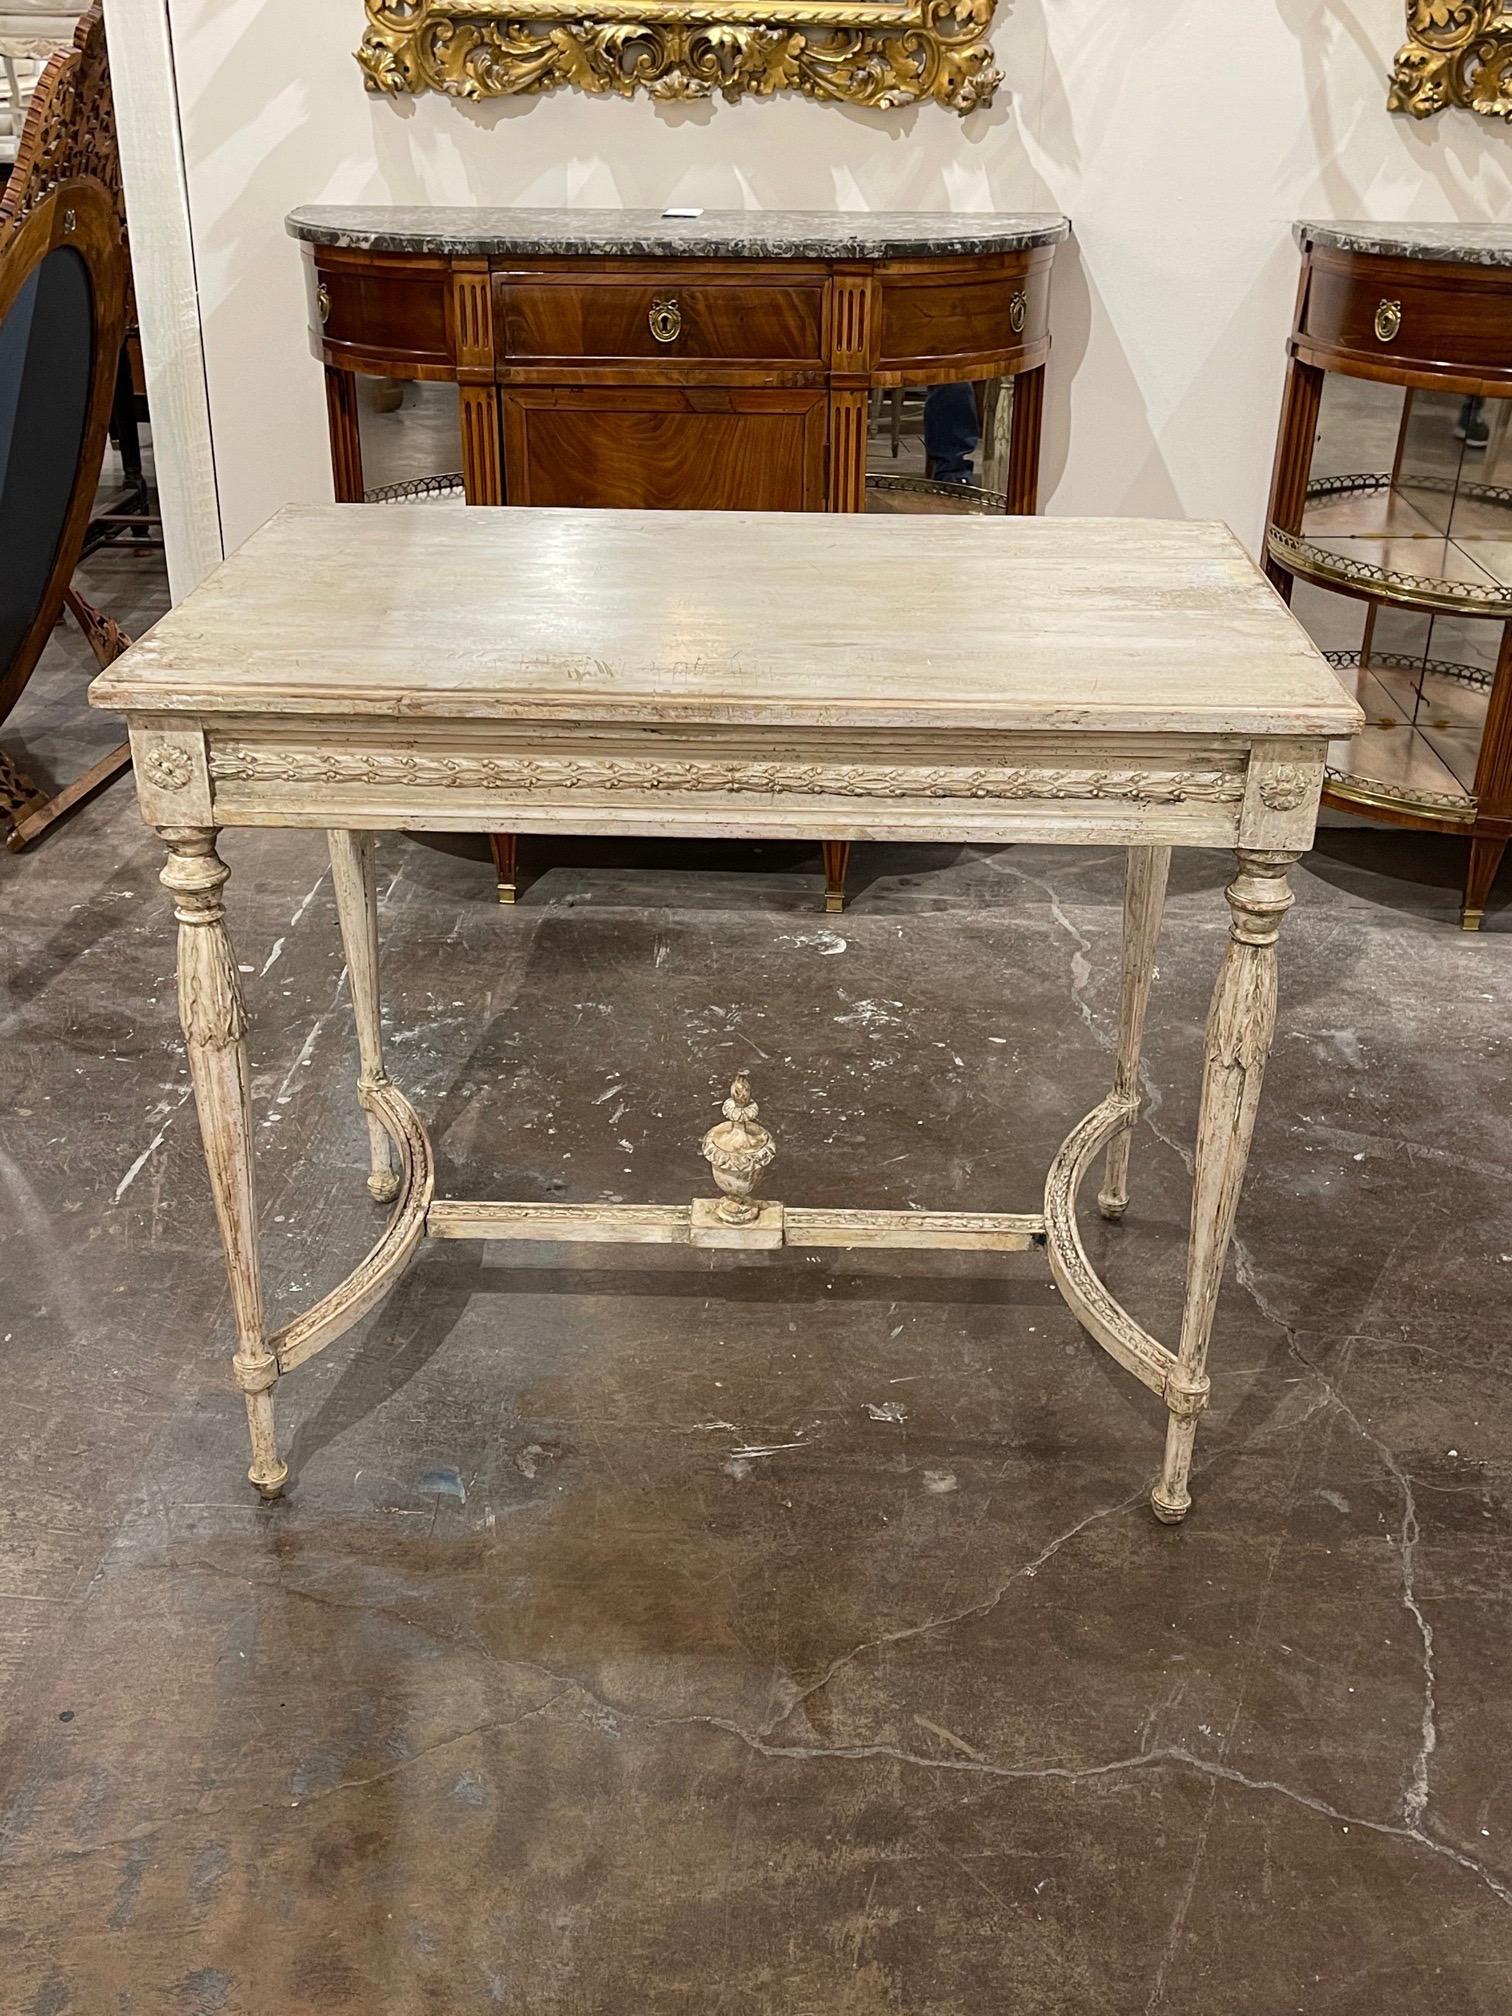 Lovely 19th century Swedish side table. This piece has nice carvings on the top and base. A beautiful patina as well. A great addition for a variety of decors!